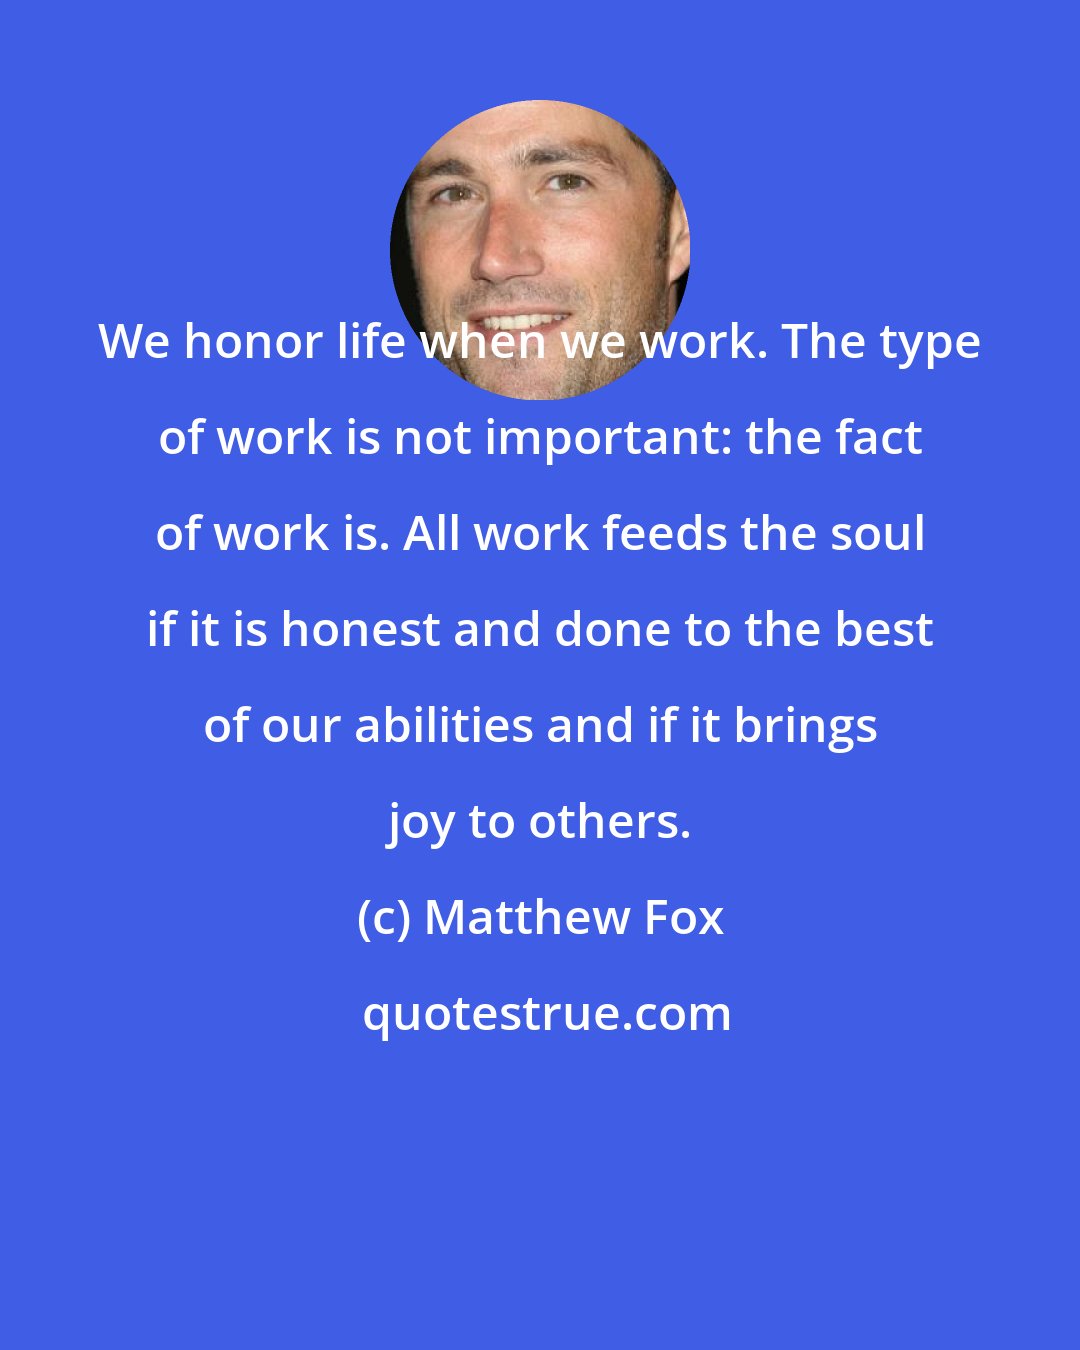 Matthew Fox: We honor life when we work. The type of work is not important: the fact of work is. All work feeds the soul if it is honest and done to the best of our abilities and if it brings joy to others.